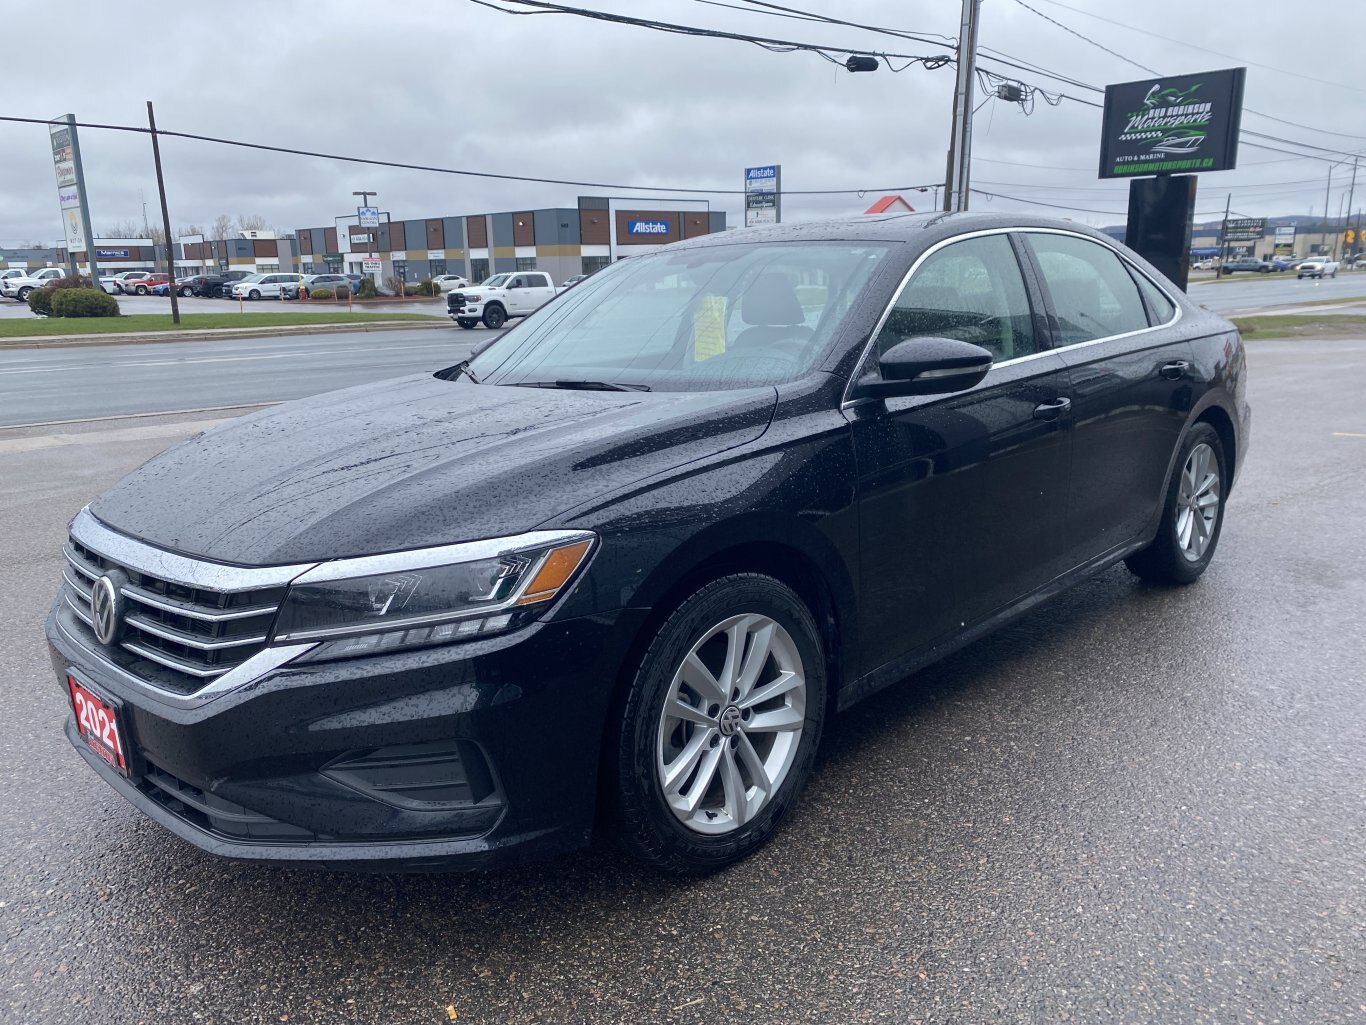 2021 VOLKSWAGEN PASSAT HIGHLINE FWD WITH SUNROOF, LEATHER SEATS, HEATED SEATS AND REAR VIEW CAMERA!!